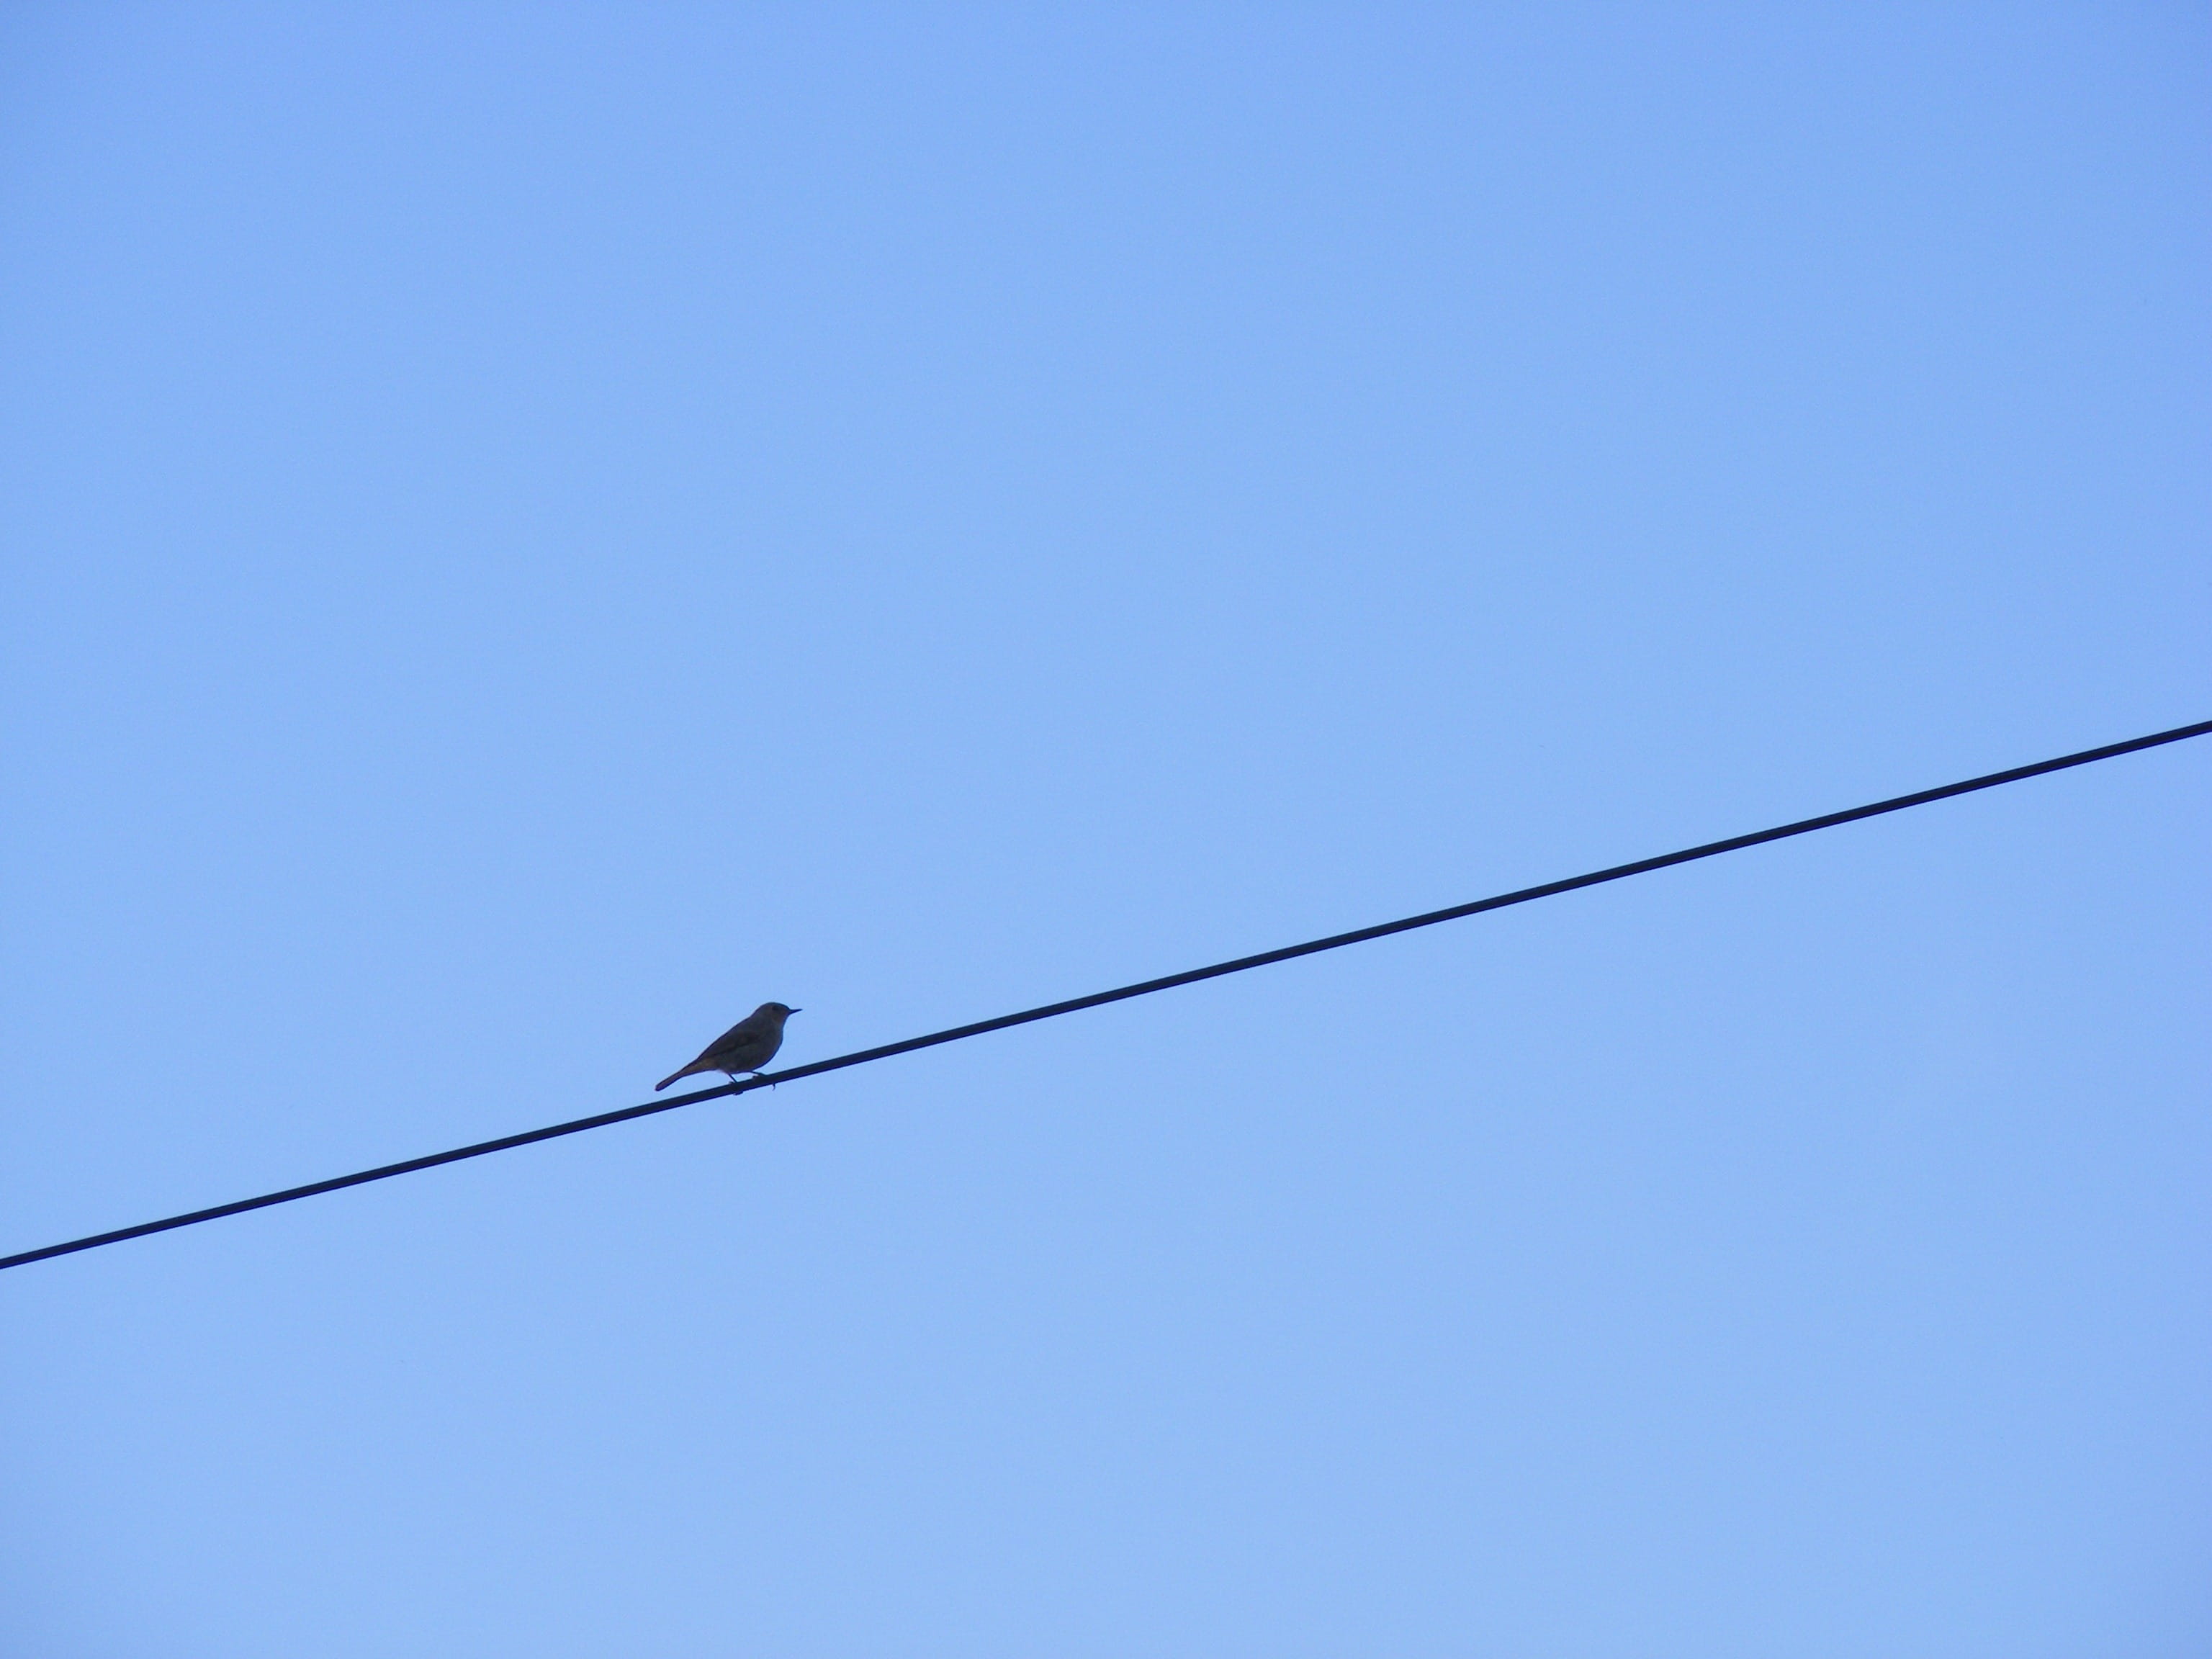 bird on wire during daytime, sitting, sky, blue sky, calm, alone